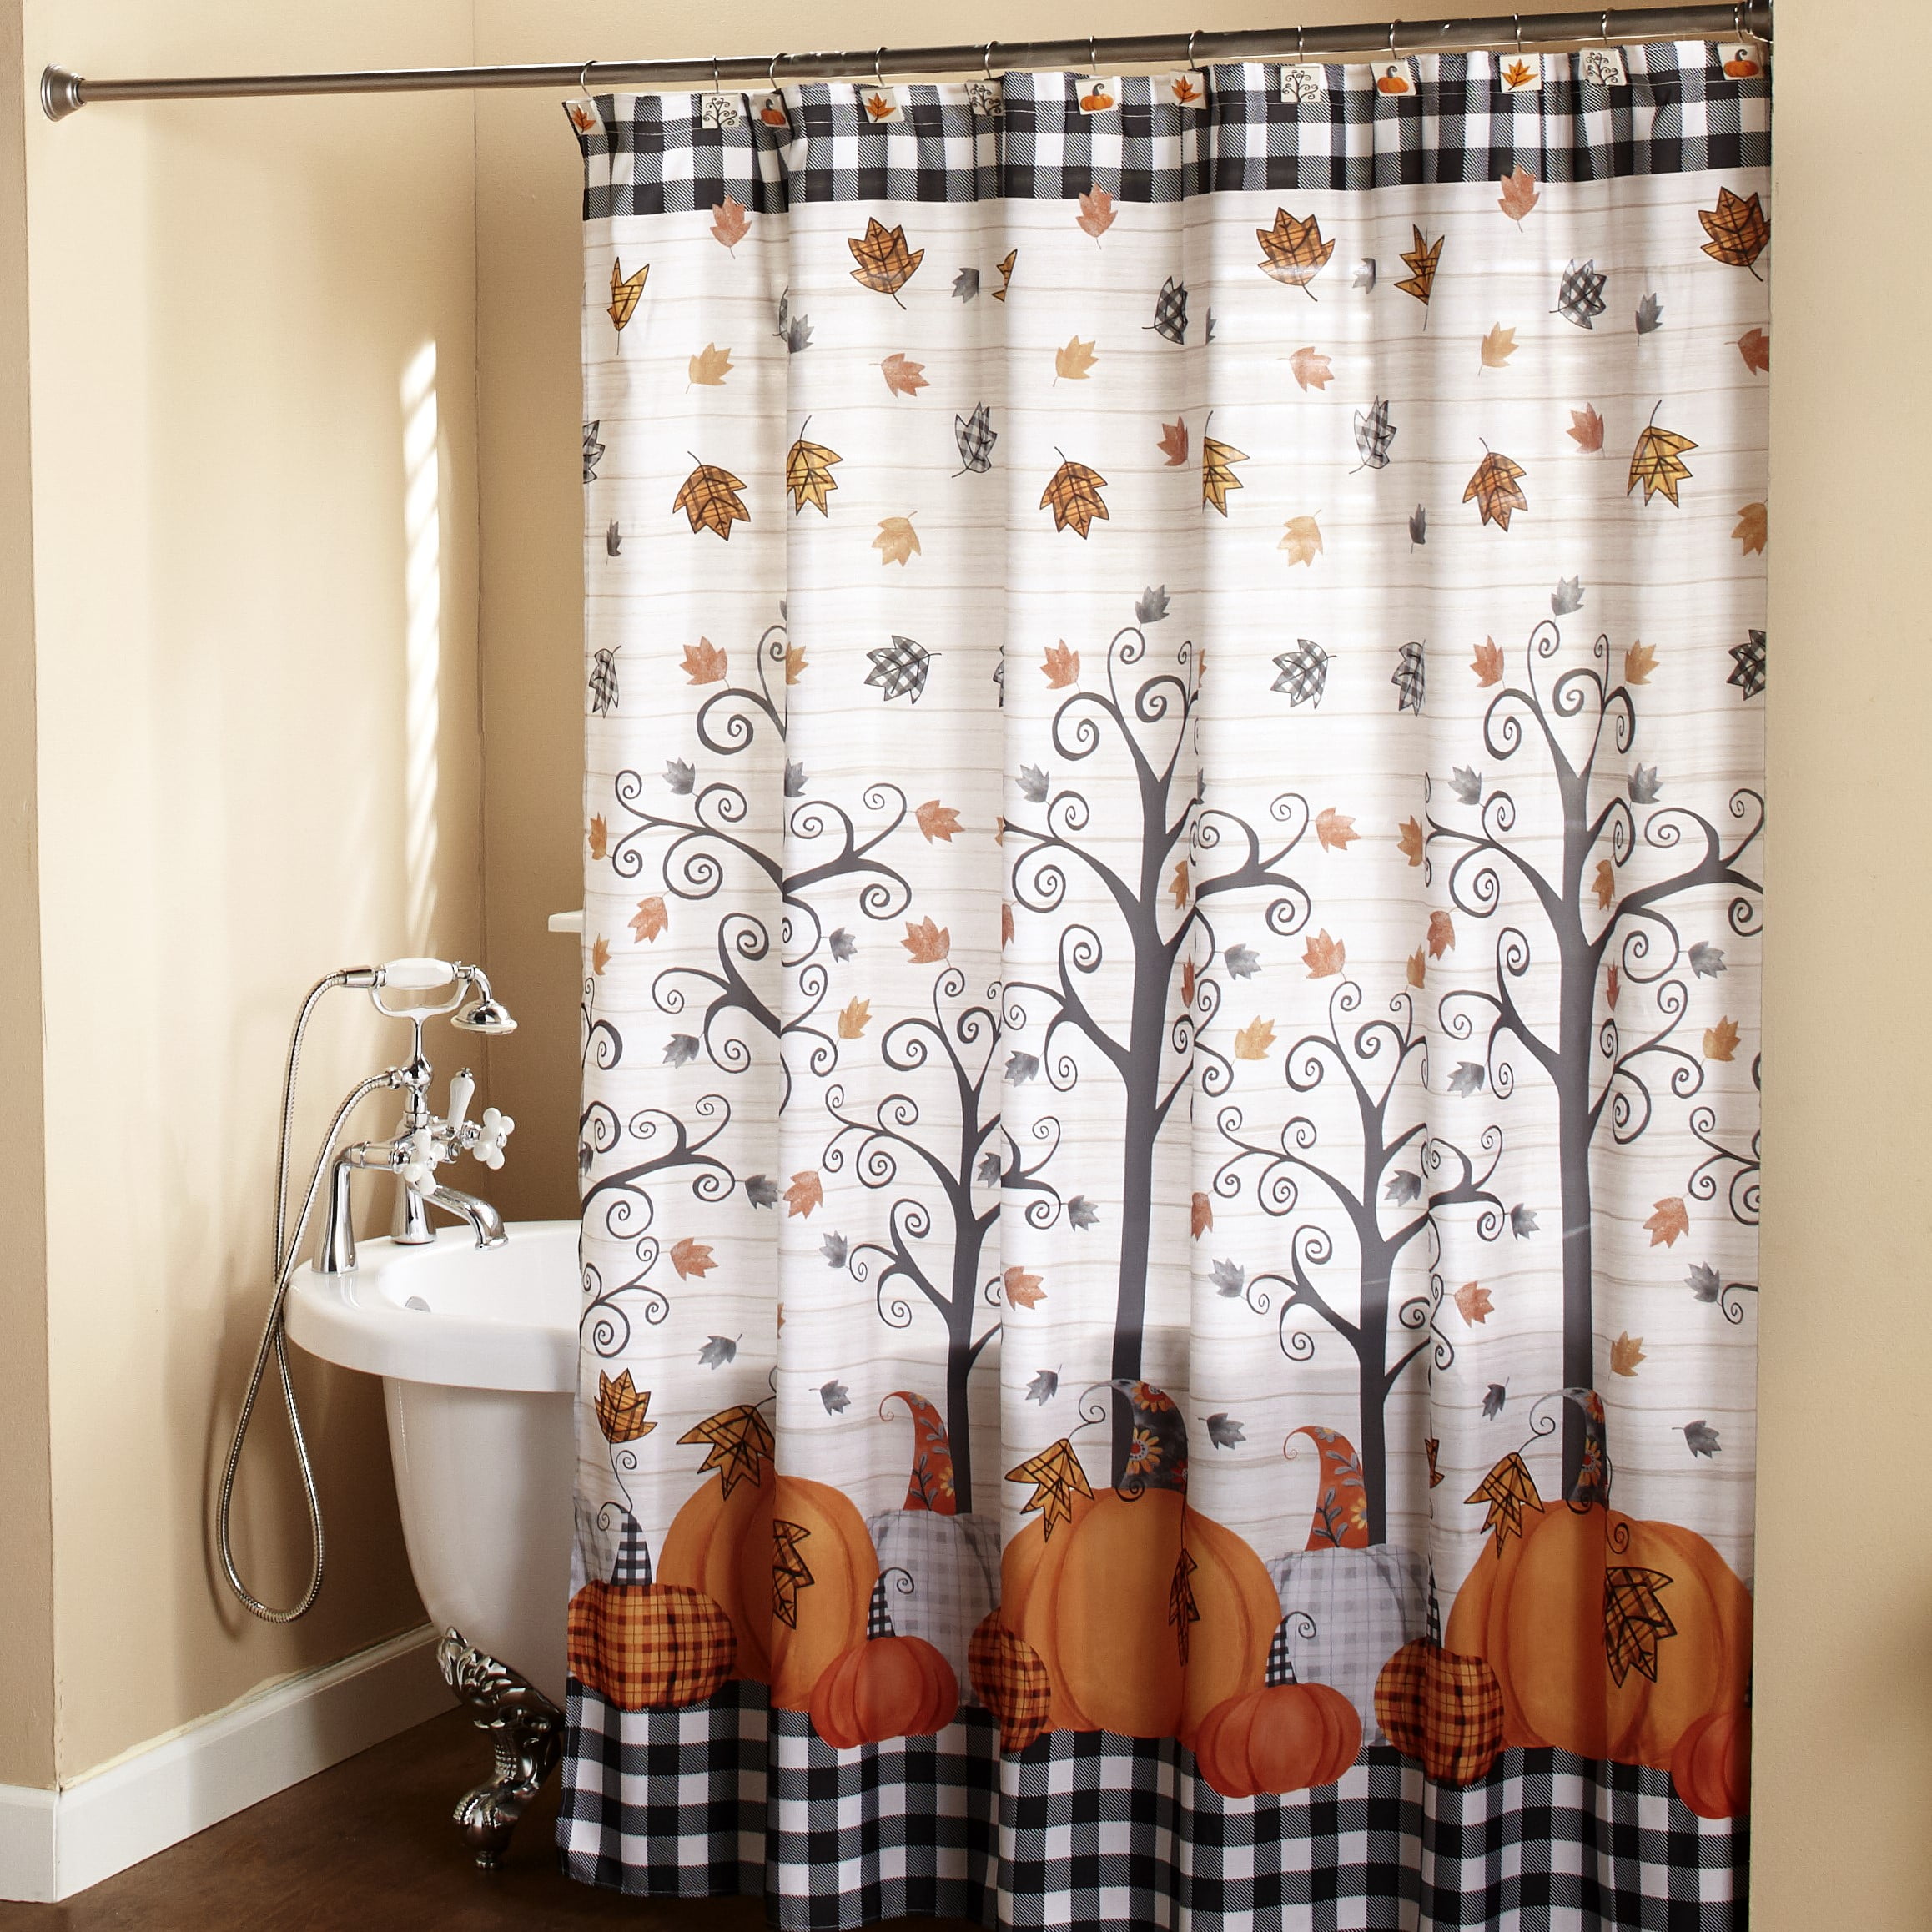 Details about   Pumpkin Corn and Apples Shower Curtain Bathroom Decor Fabric & 12hooks 71in 